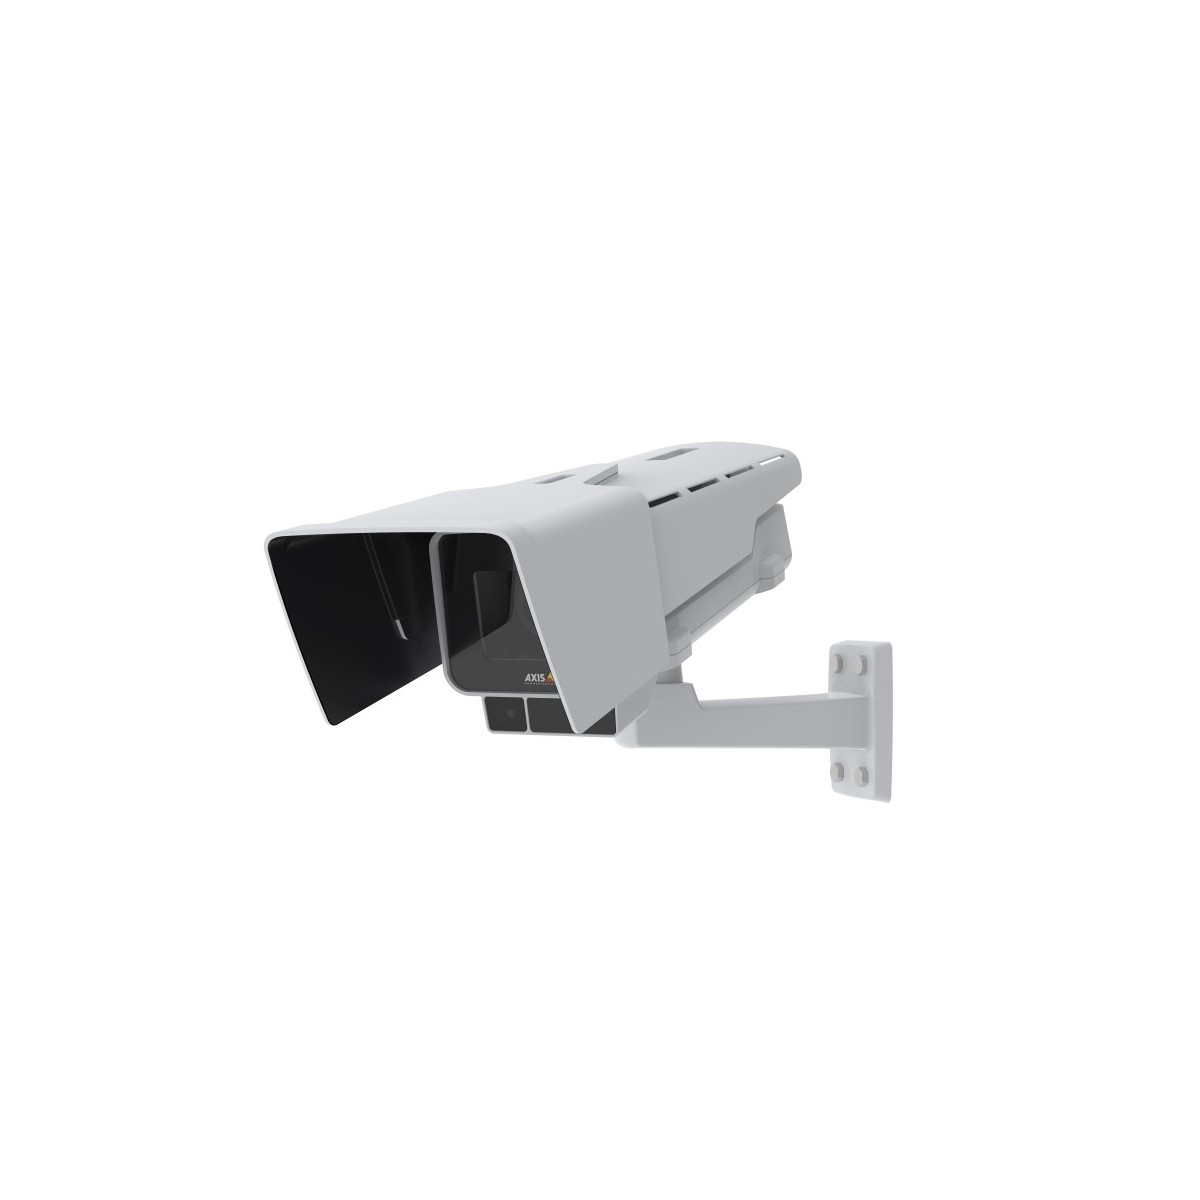 Axis P1378-LE Barebone - IP security camera - Outdoor - Wired - Digital PTZ - Pelco-D - Simplified Chinese - Traditional Chinese